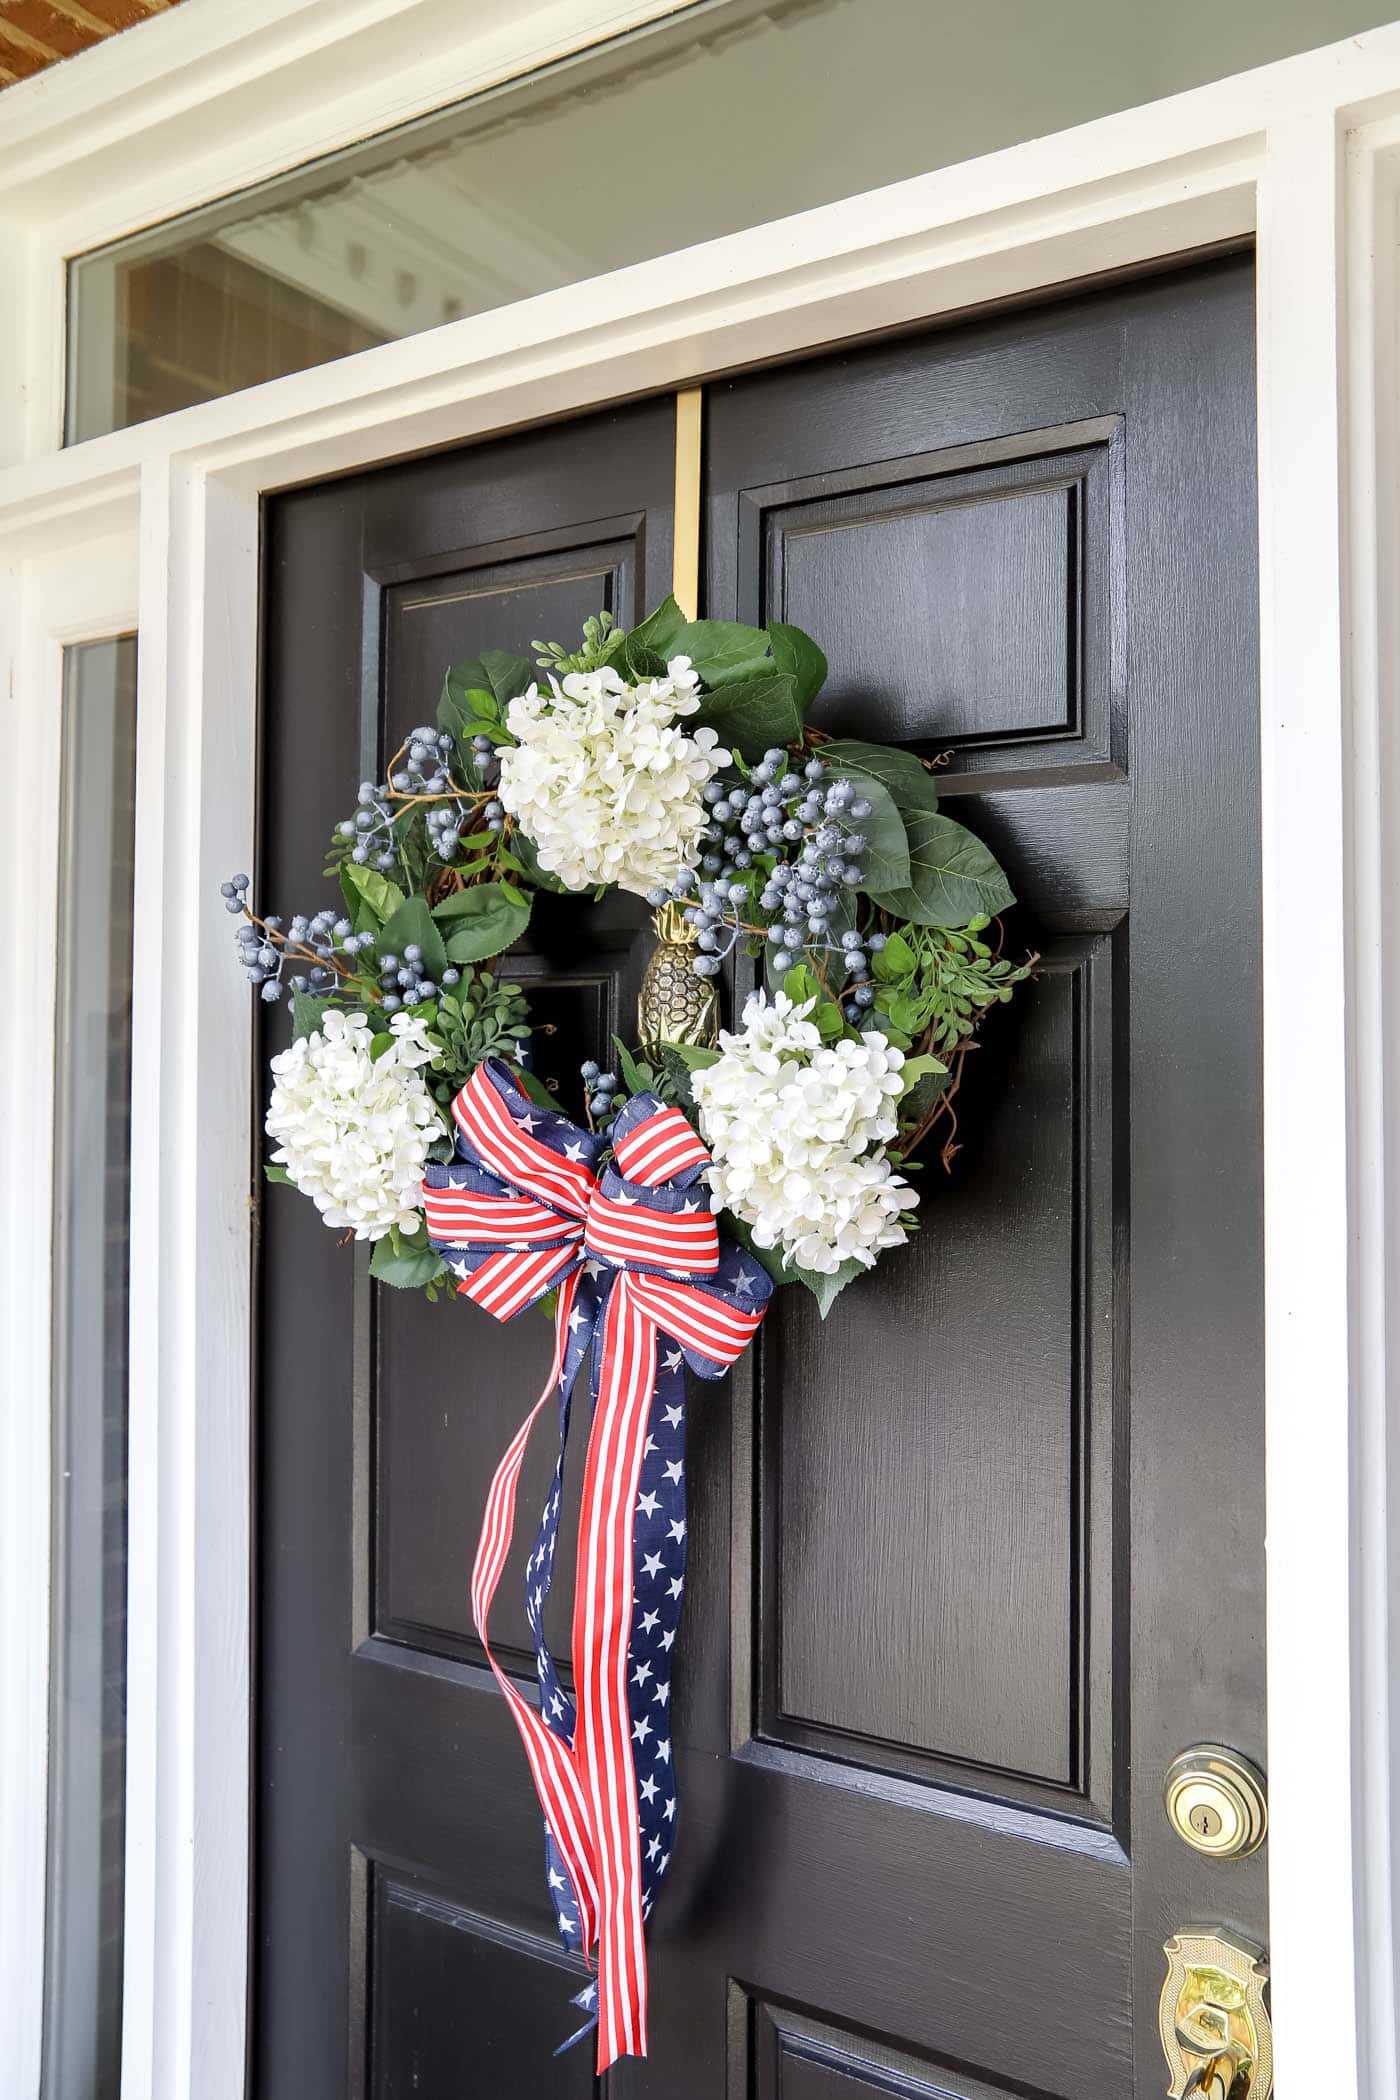 How To Make A Patriotic Wreath